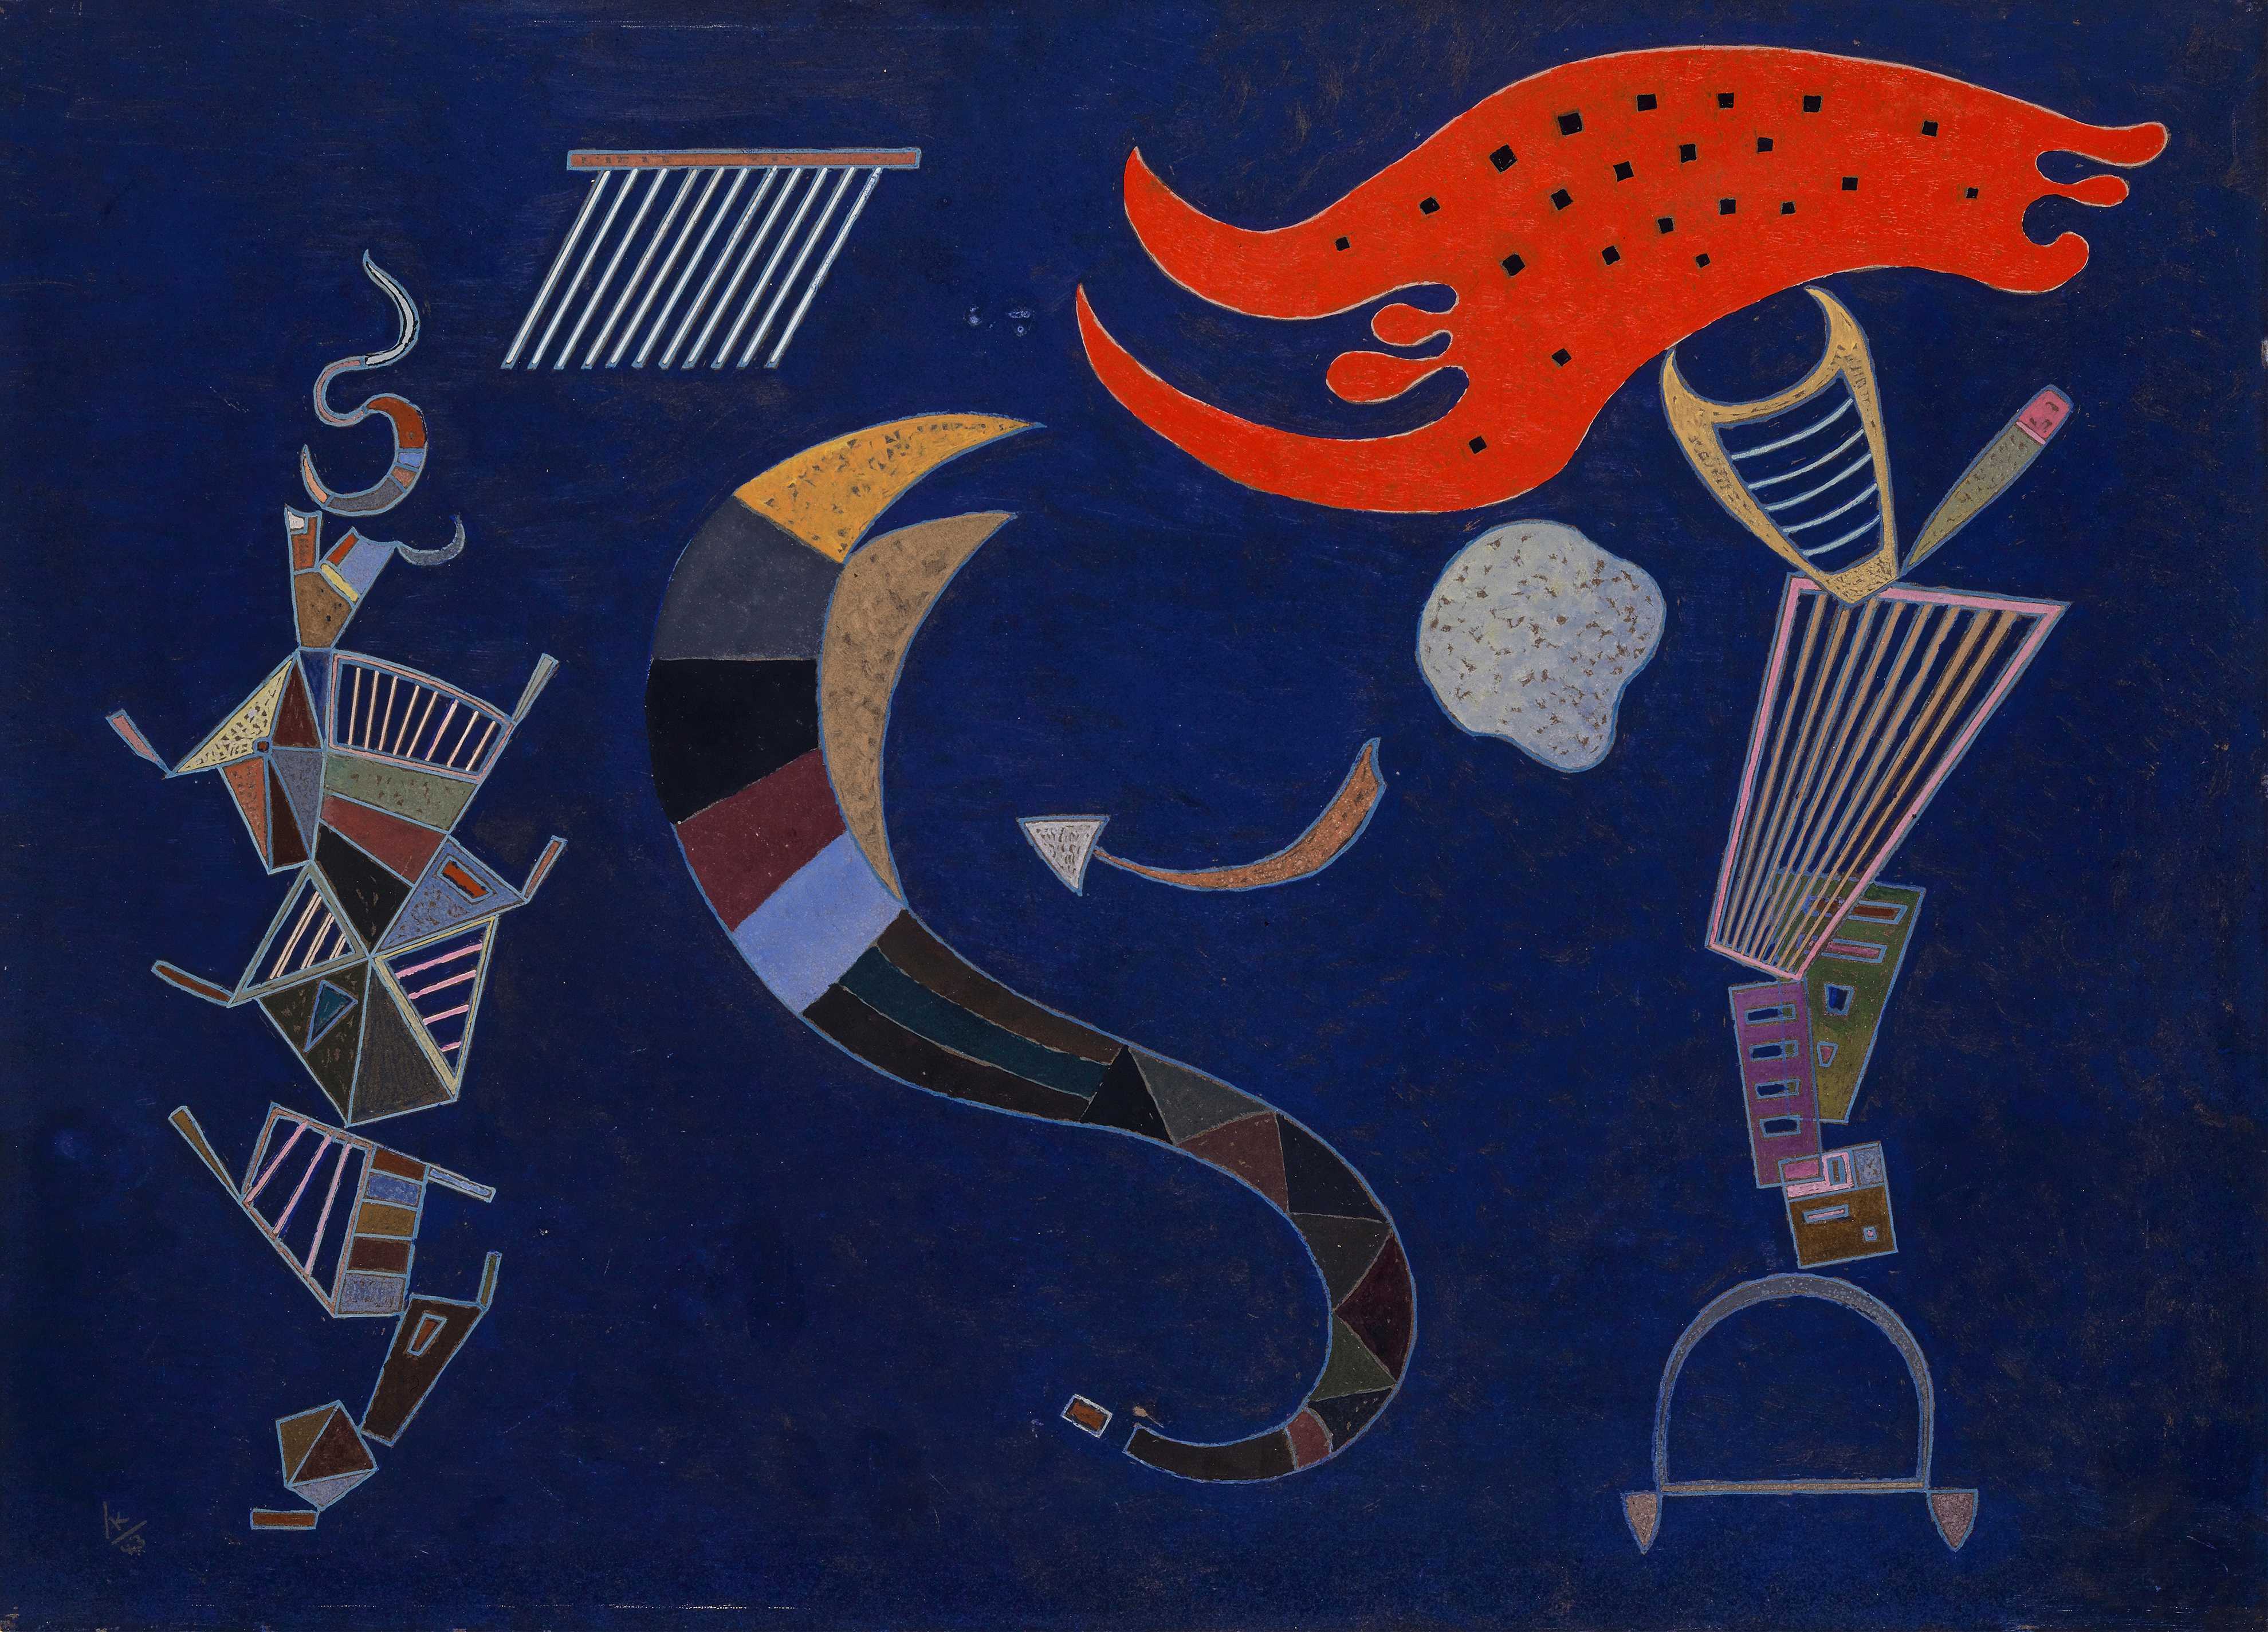 Find out more about Wassily Kandinsky - The Arrow